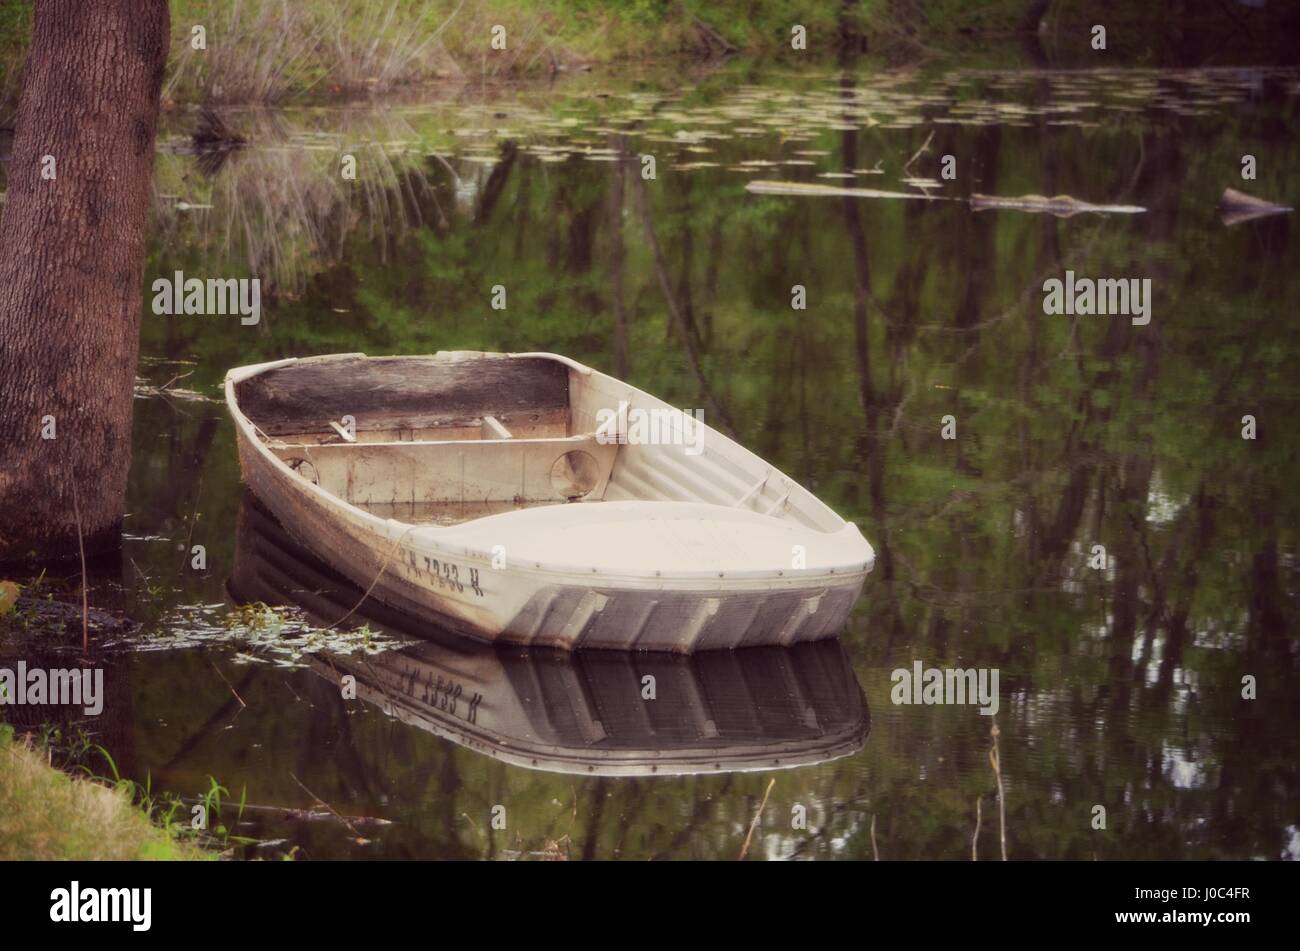 Old boat in a lily pond Stock Photo